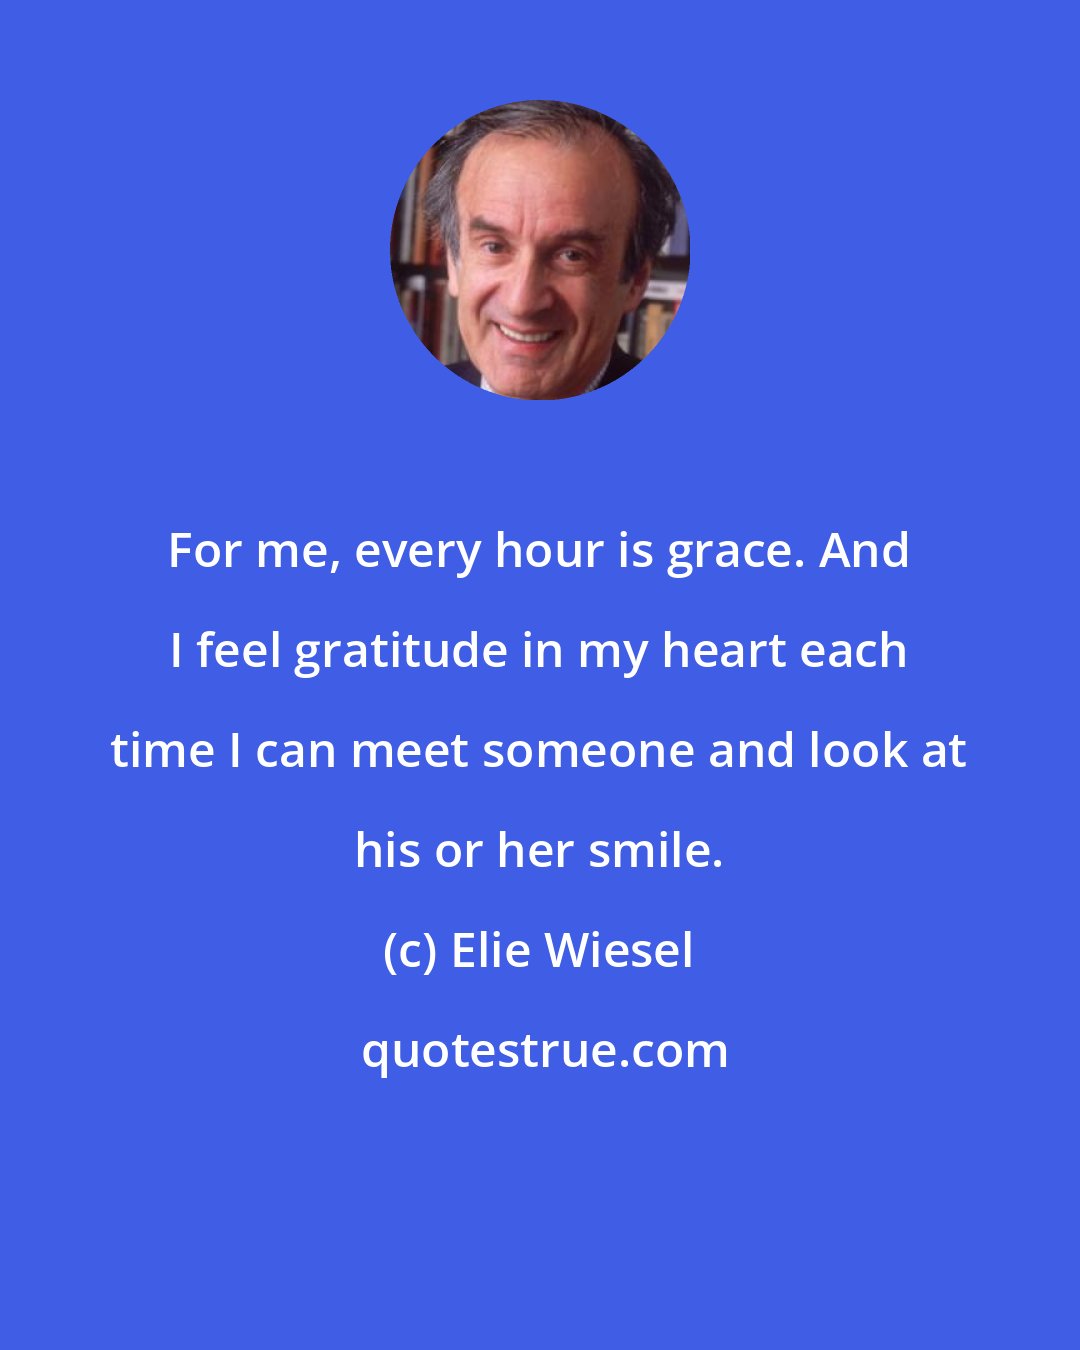 Elie Wiesel: For me, every hour is grace. And I feel gratitude in my heart each time I can meet someone and look at his or her smile.